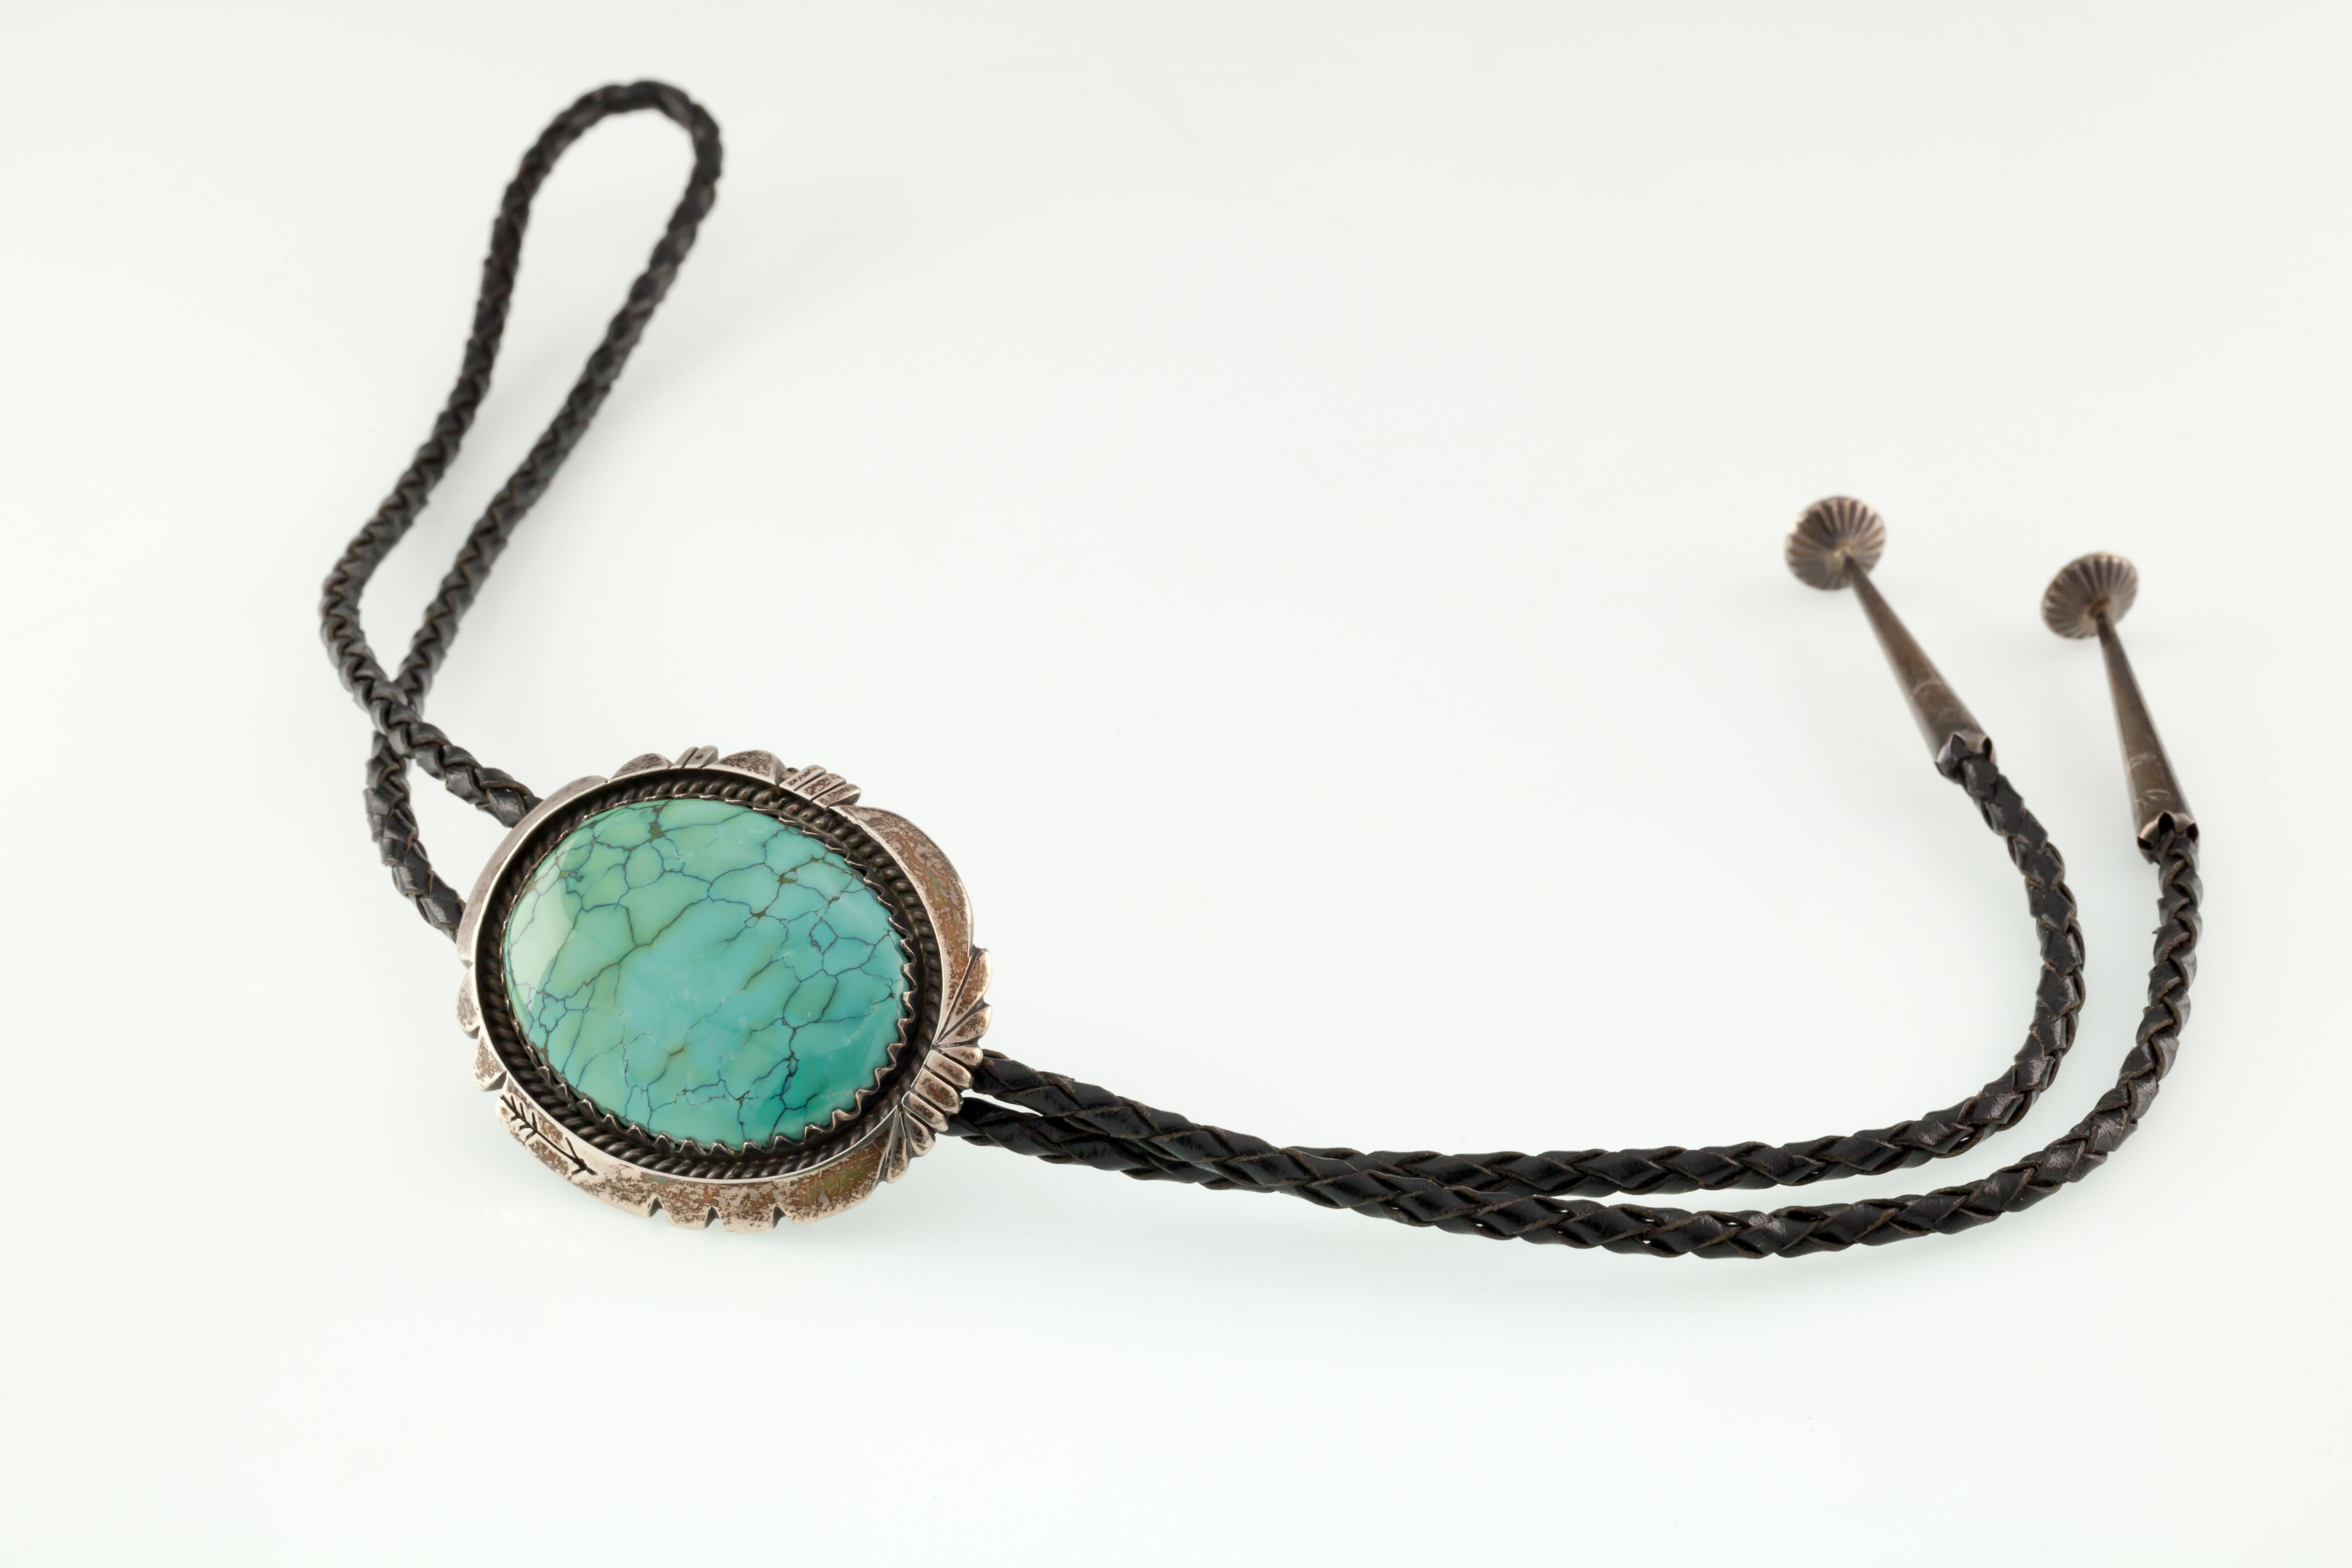 Native American Vintage Navajo Turquoise & Sterling Silver Bolo Tie in Black Leather by Montoya